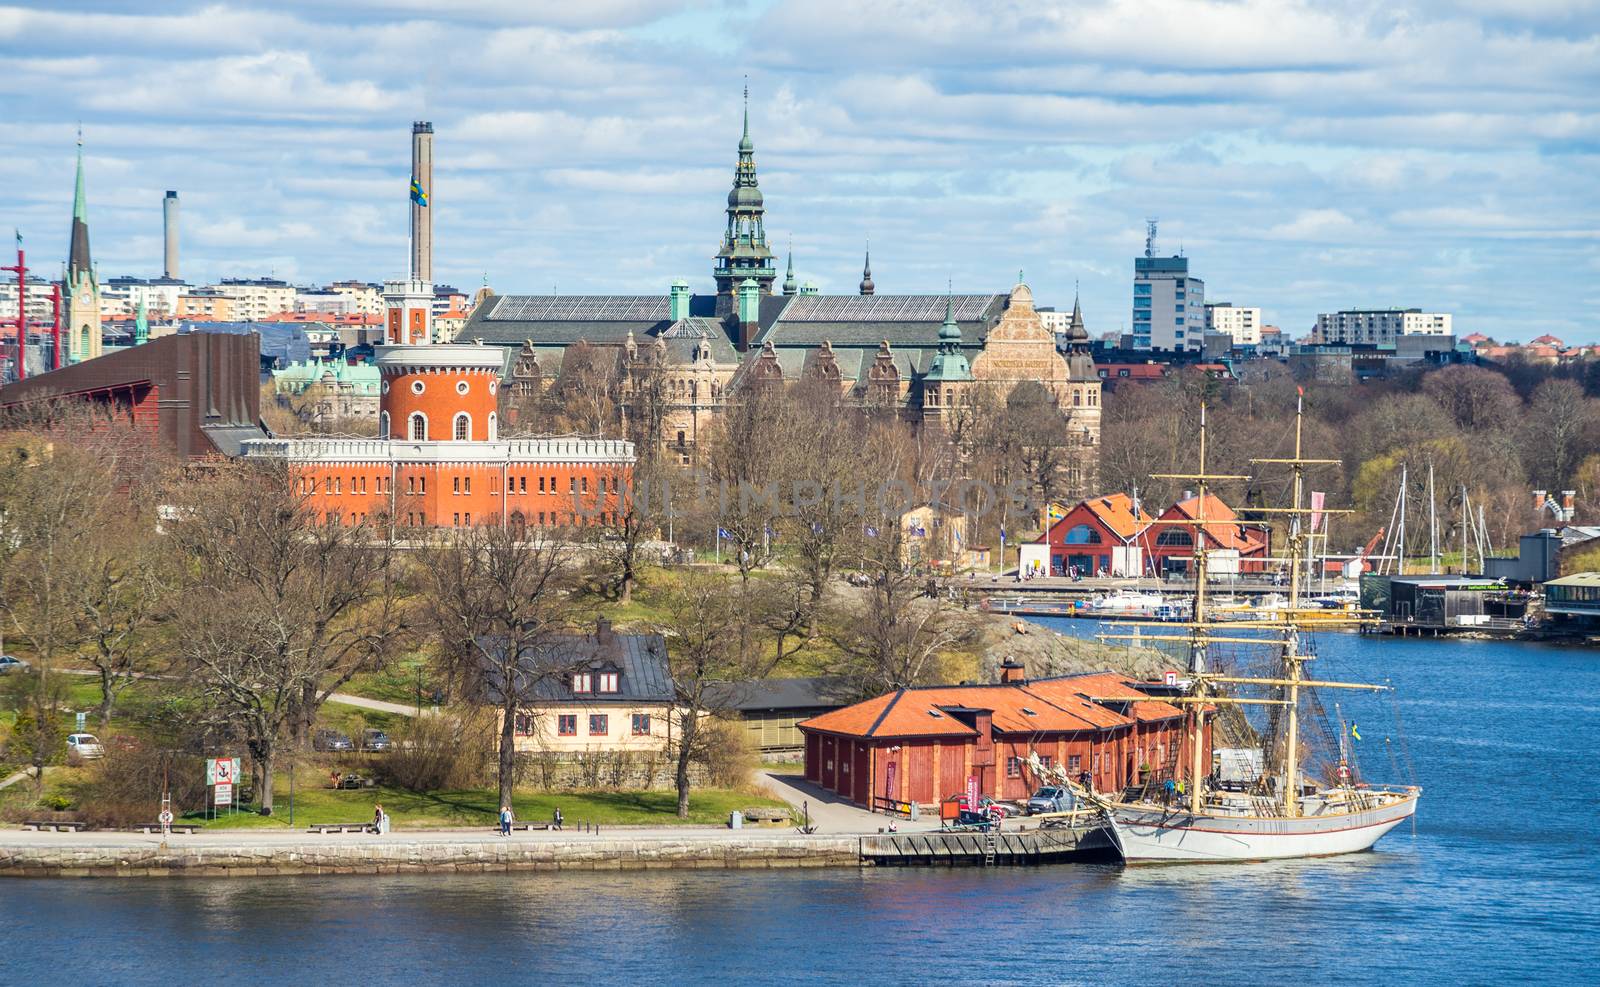 Sights of the Swedish capital by fifg